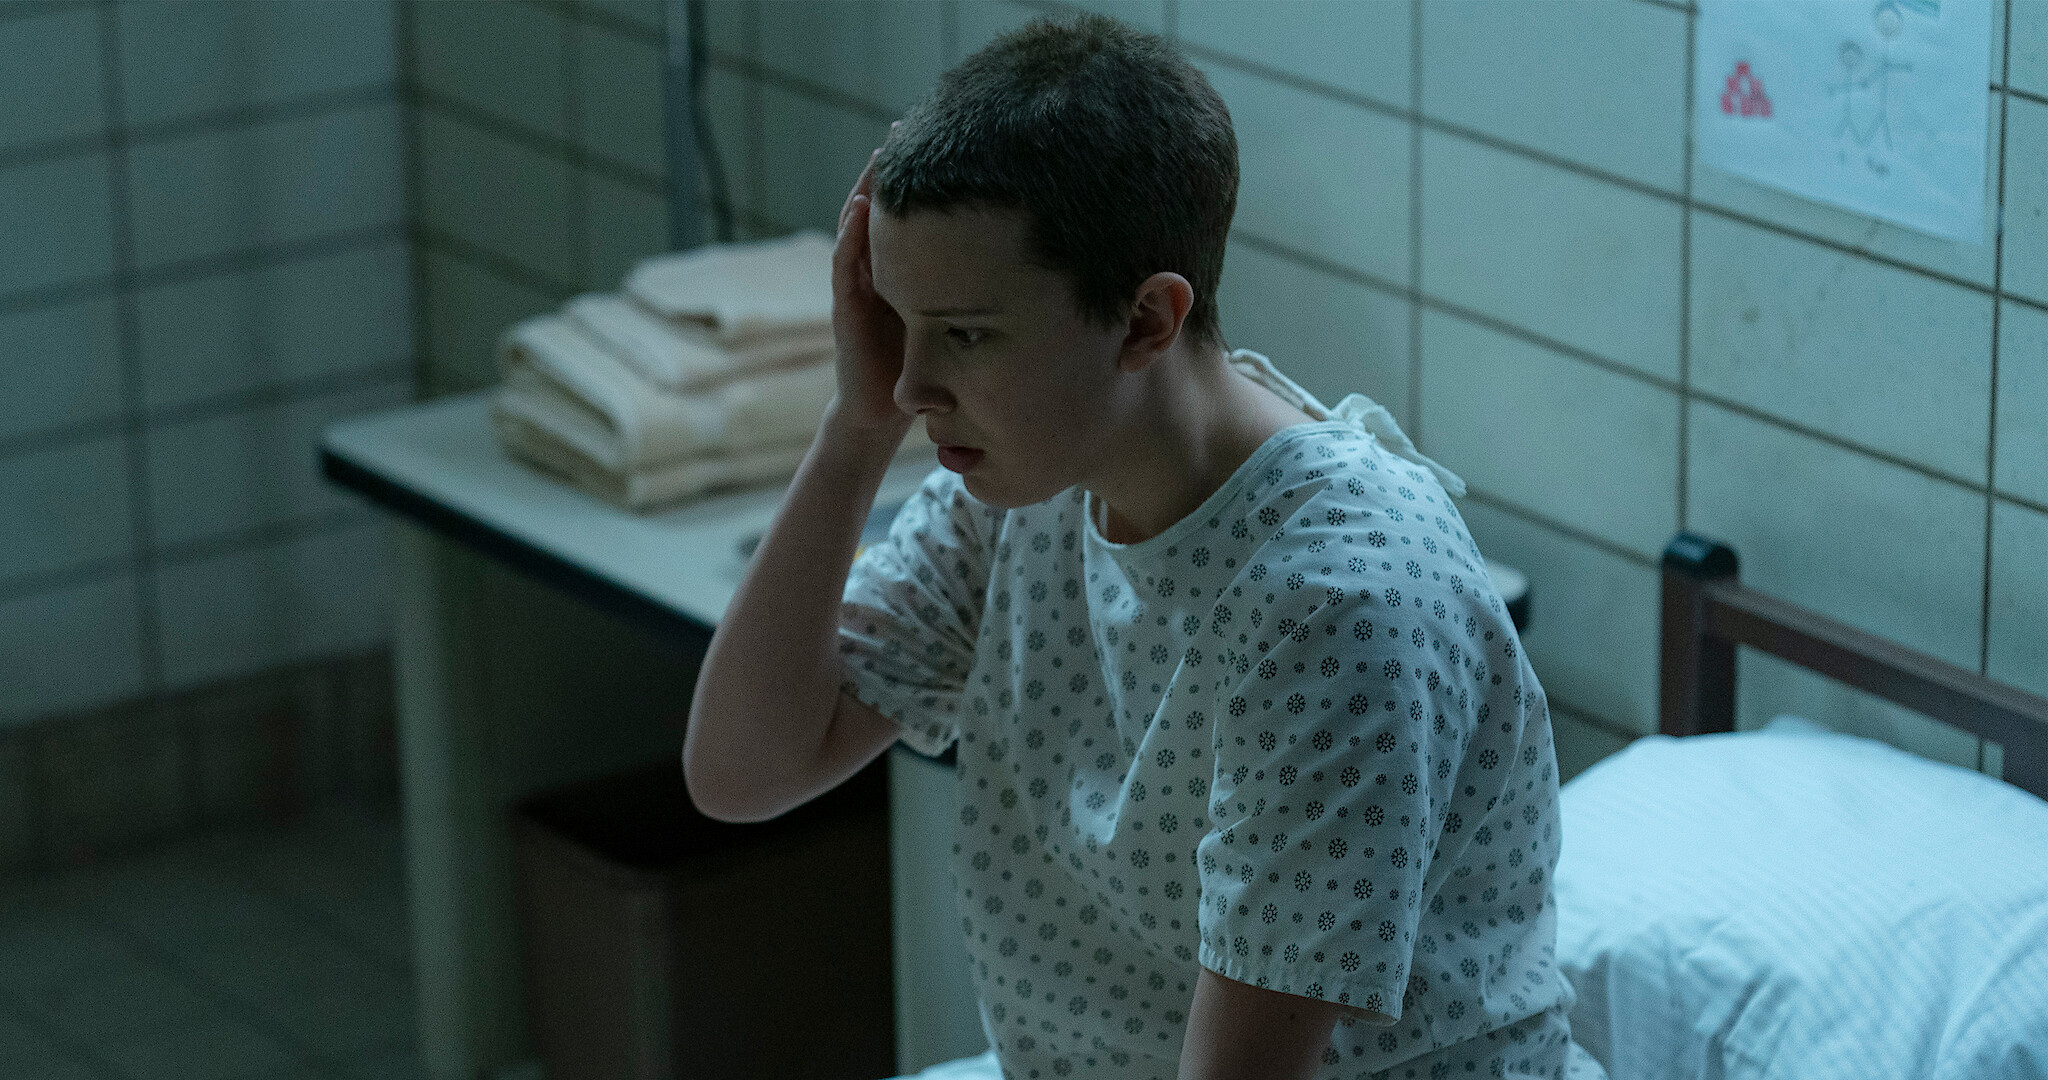 Stranger Things — The look on his face, he was scared. Really